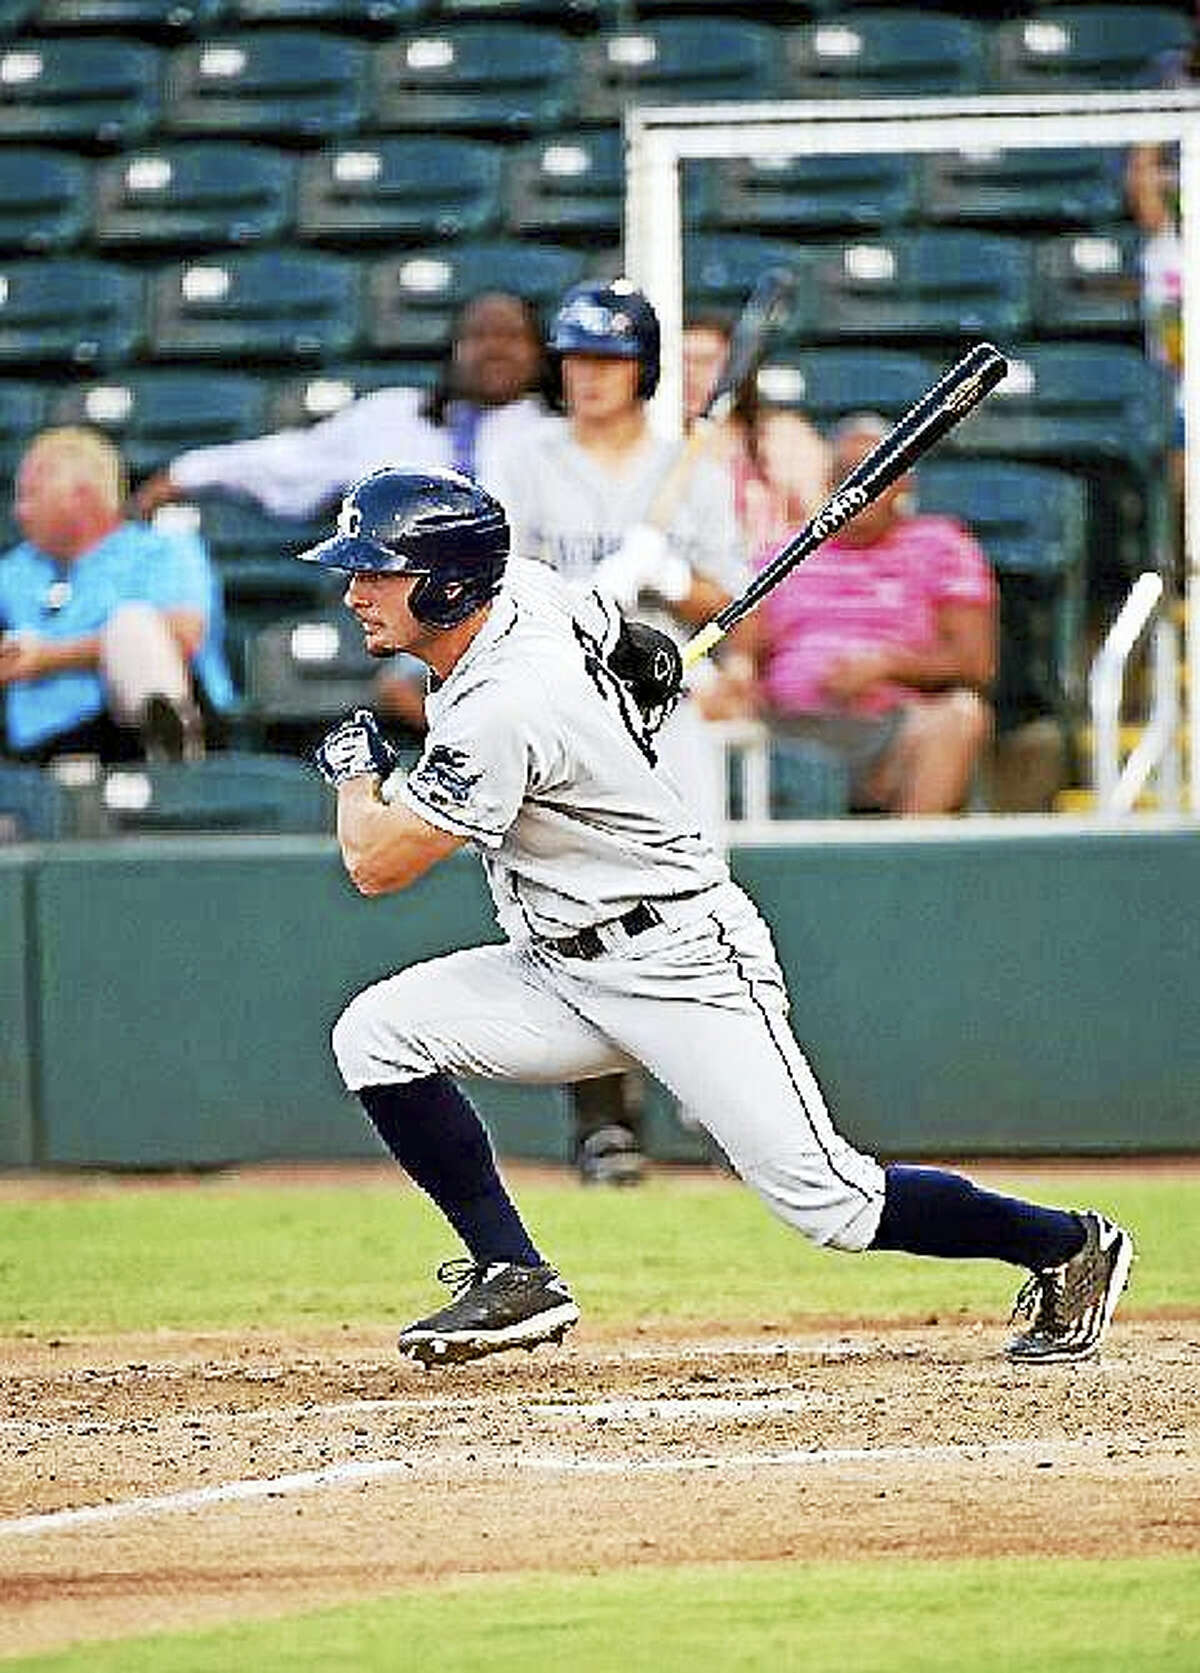 Monroe’s Thomas Milone is playing for the Charlotte Stone Crabs, Tampa Bay’s high-A affiliate, this season.